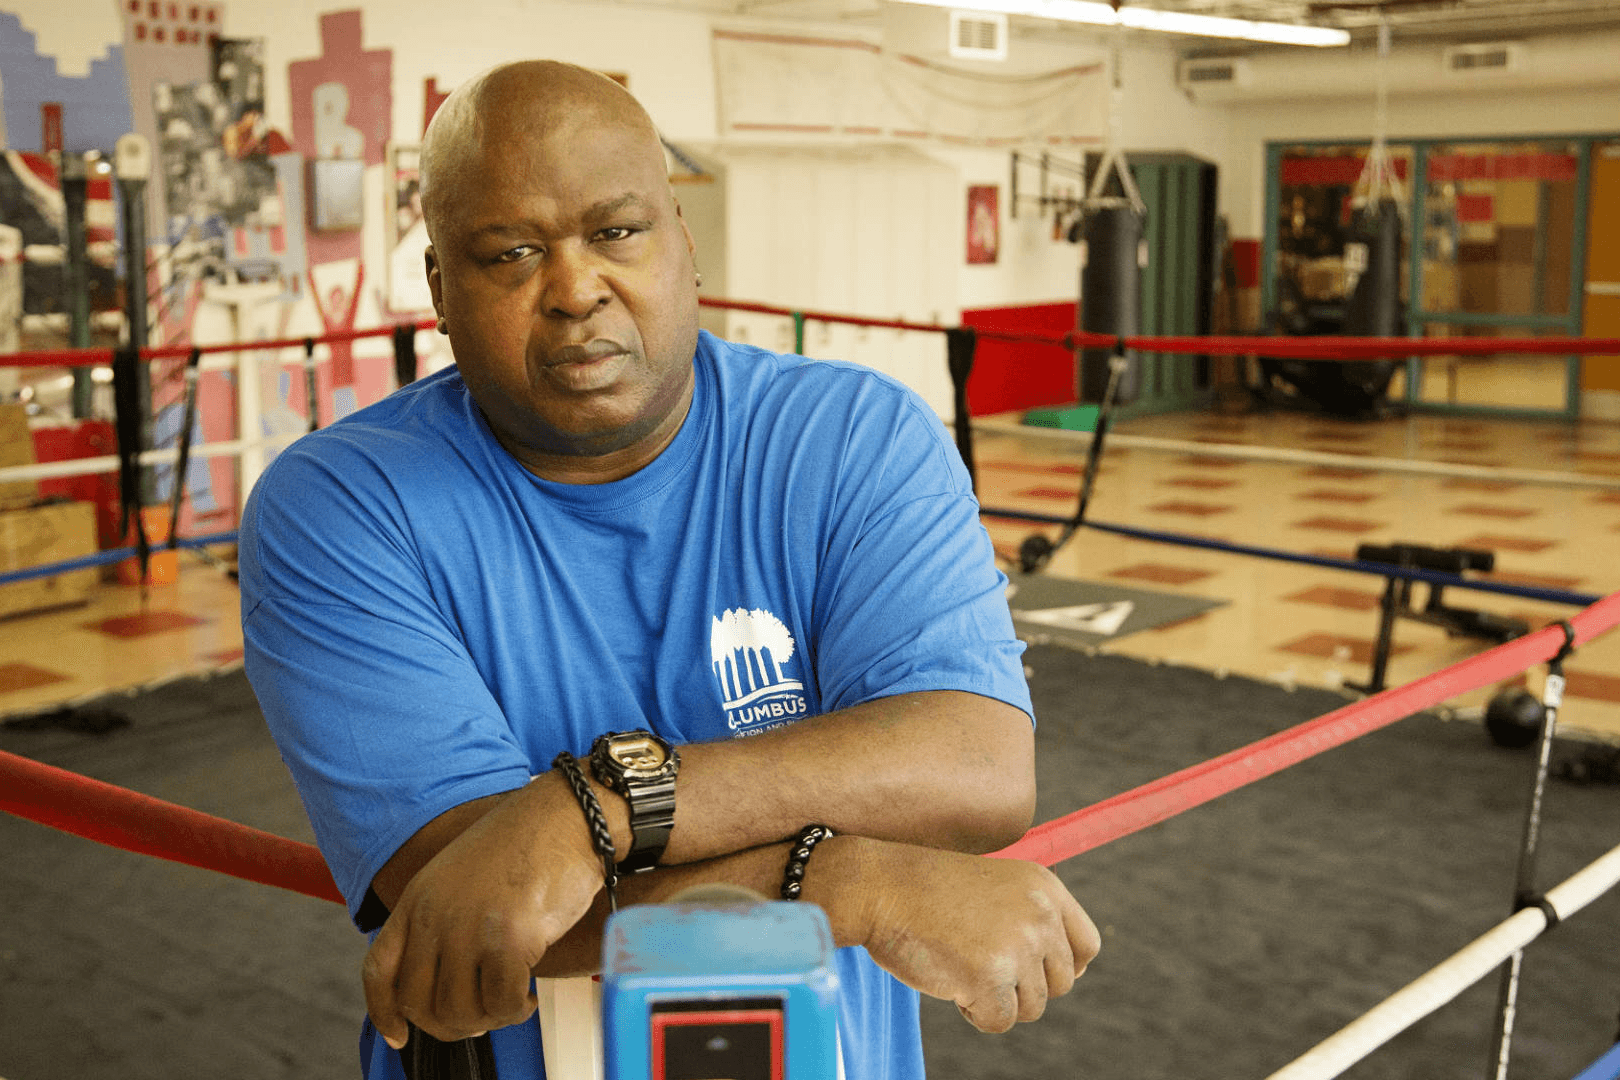 What is Buster Douglas' Net Worth?